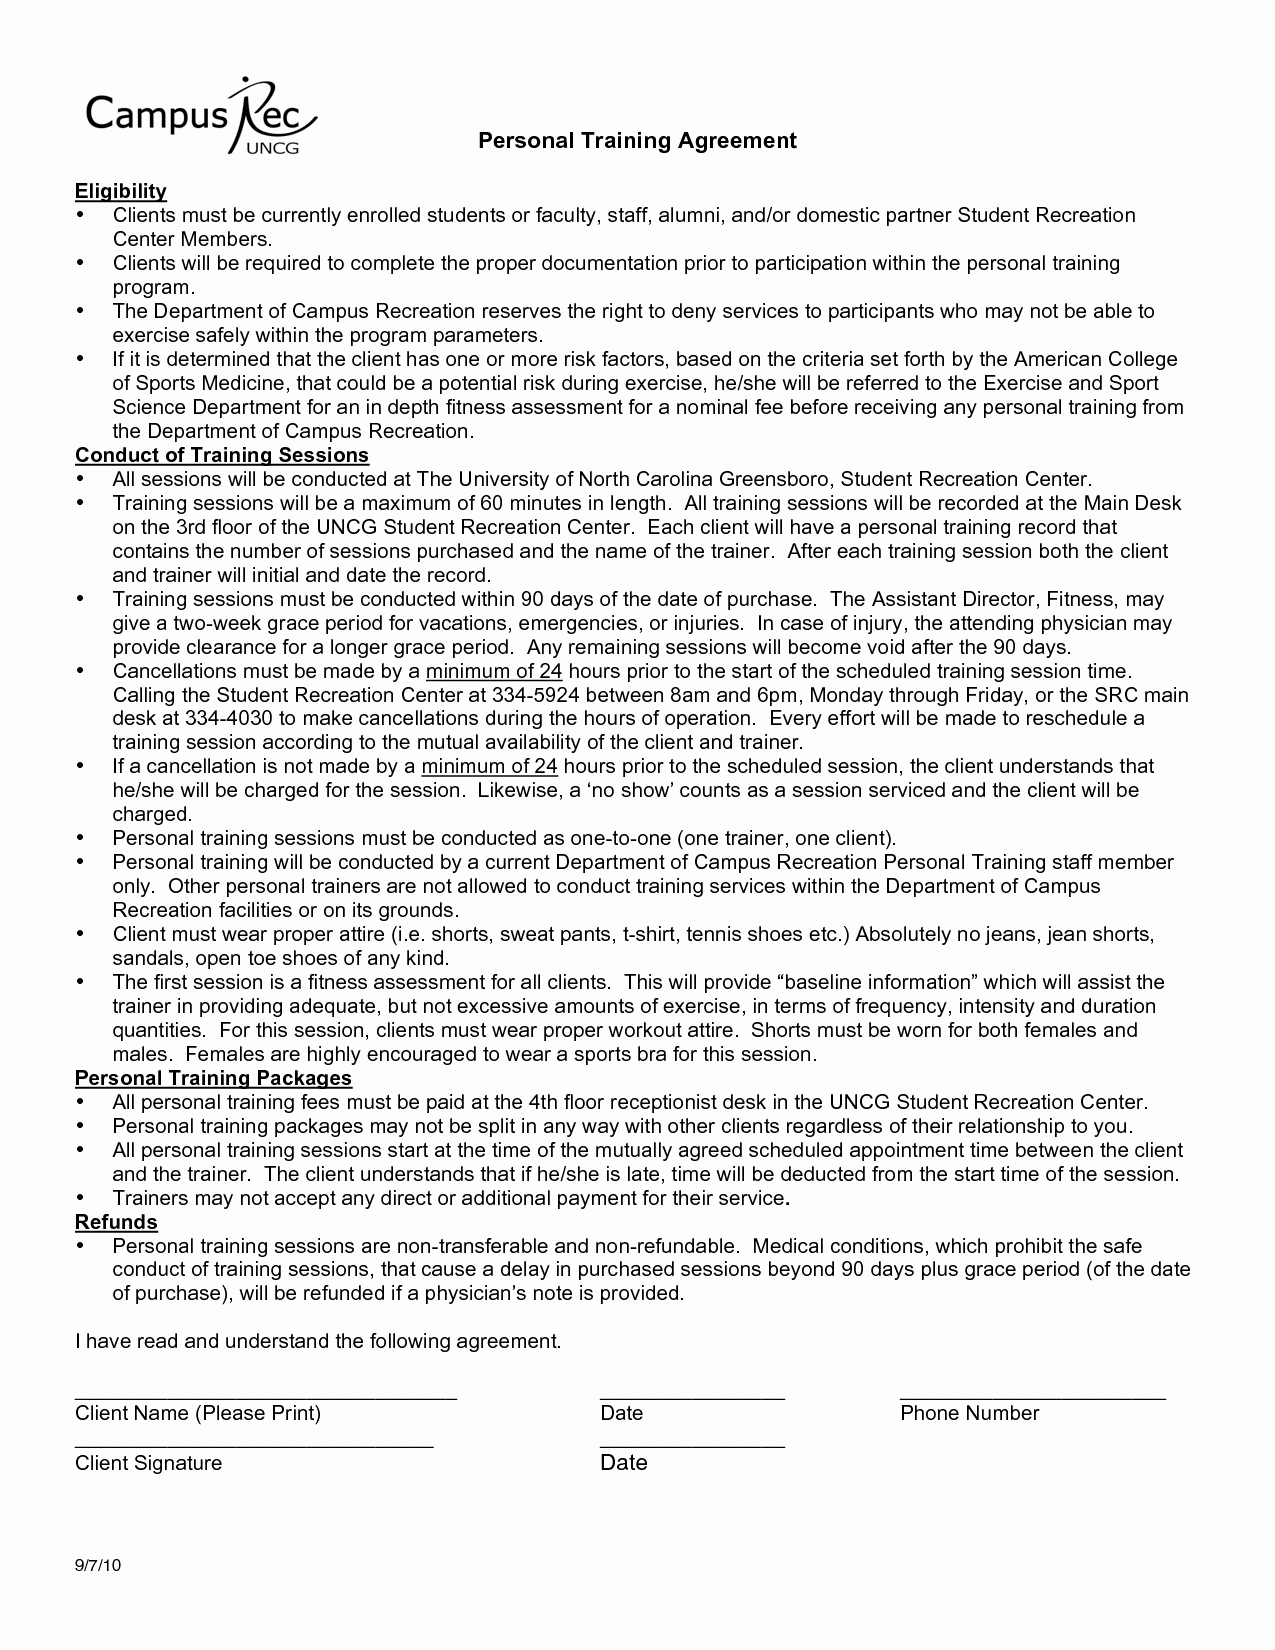 10 Best Of Personal Training Agreement form